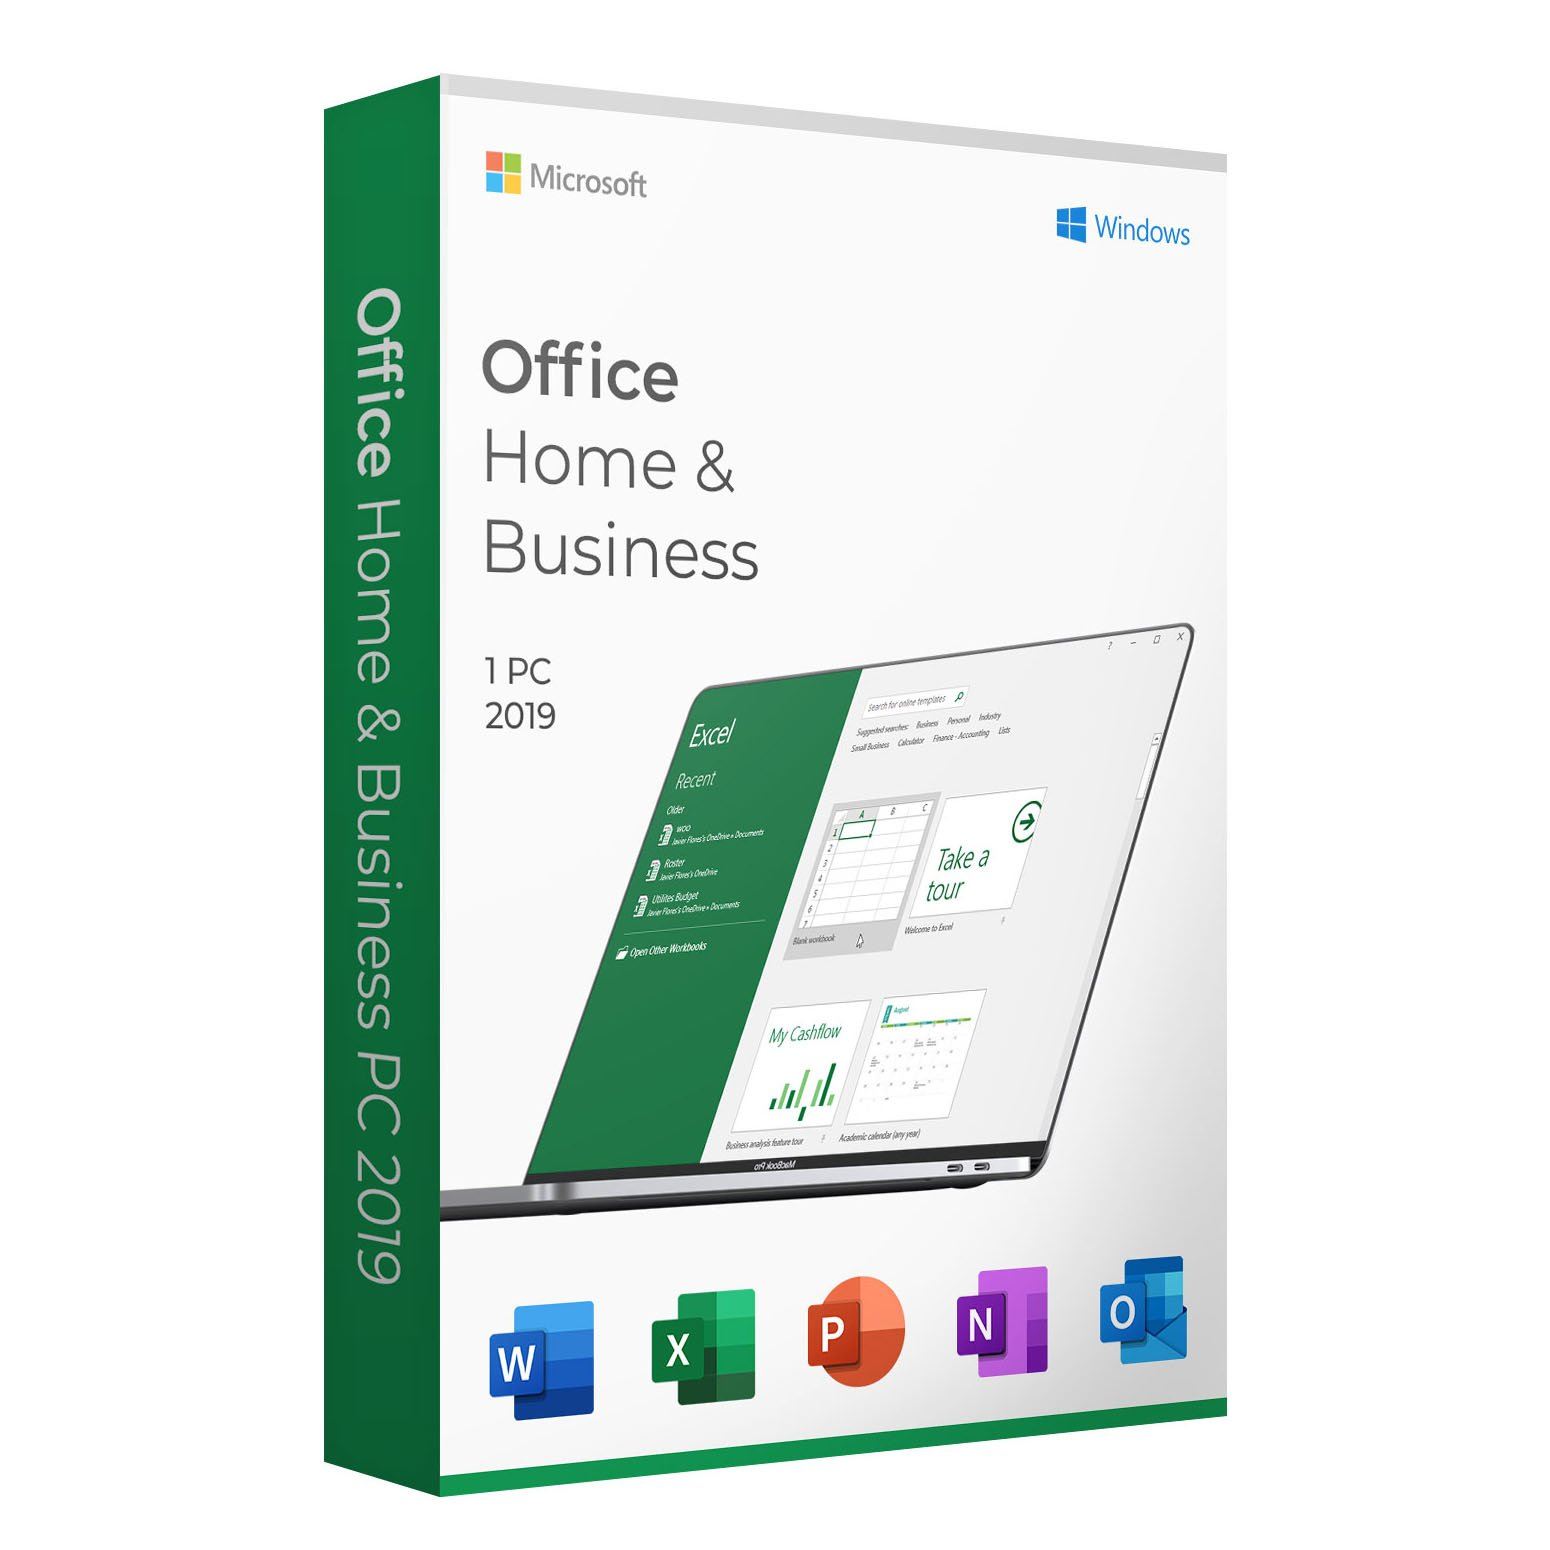 Home and business 2019. Microsoft Office 2019 Home and Business. Office 2019 Home and Business Box. Офисное приложение MS Office Home and Business 2021 professional Plus. Microsoft Office 2019 Home and Business for Mac.